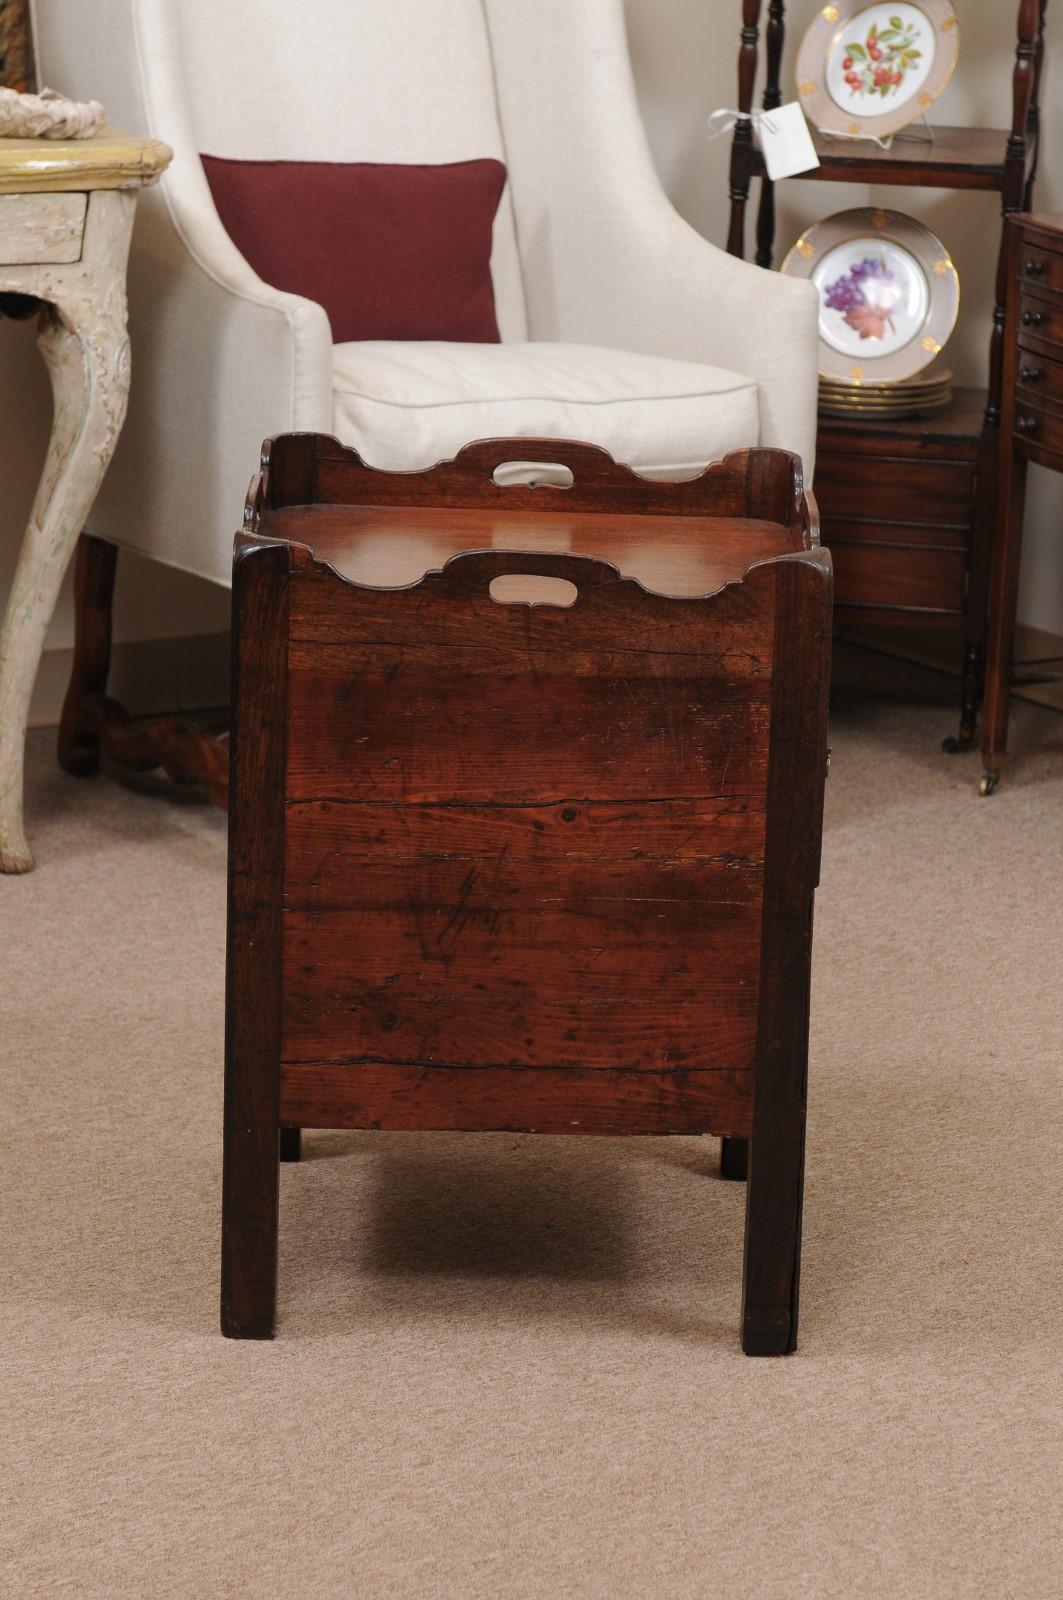 19th Century 19th C English Bedside Commode w/ Cabinet, Drawer, & Tray Top in Mahogany & Pine For Sale